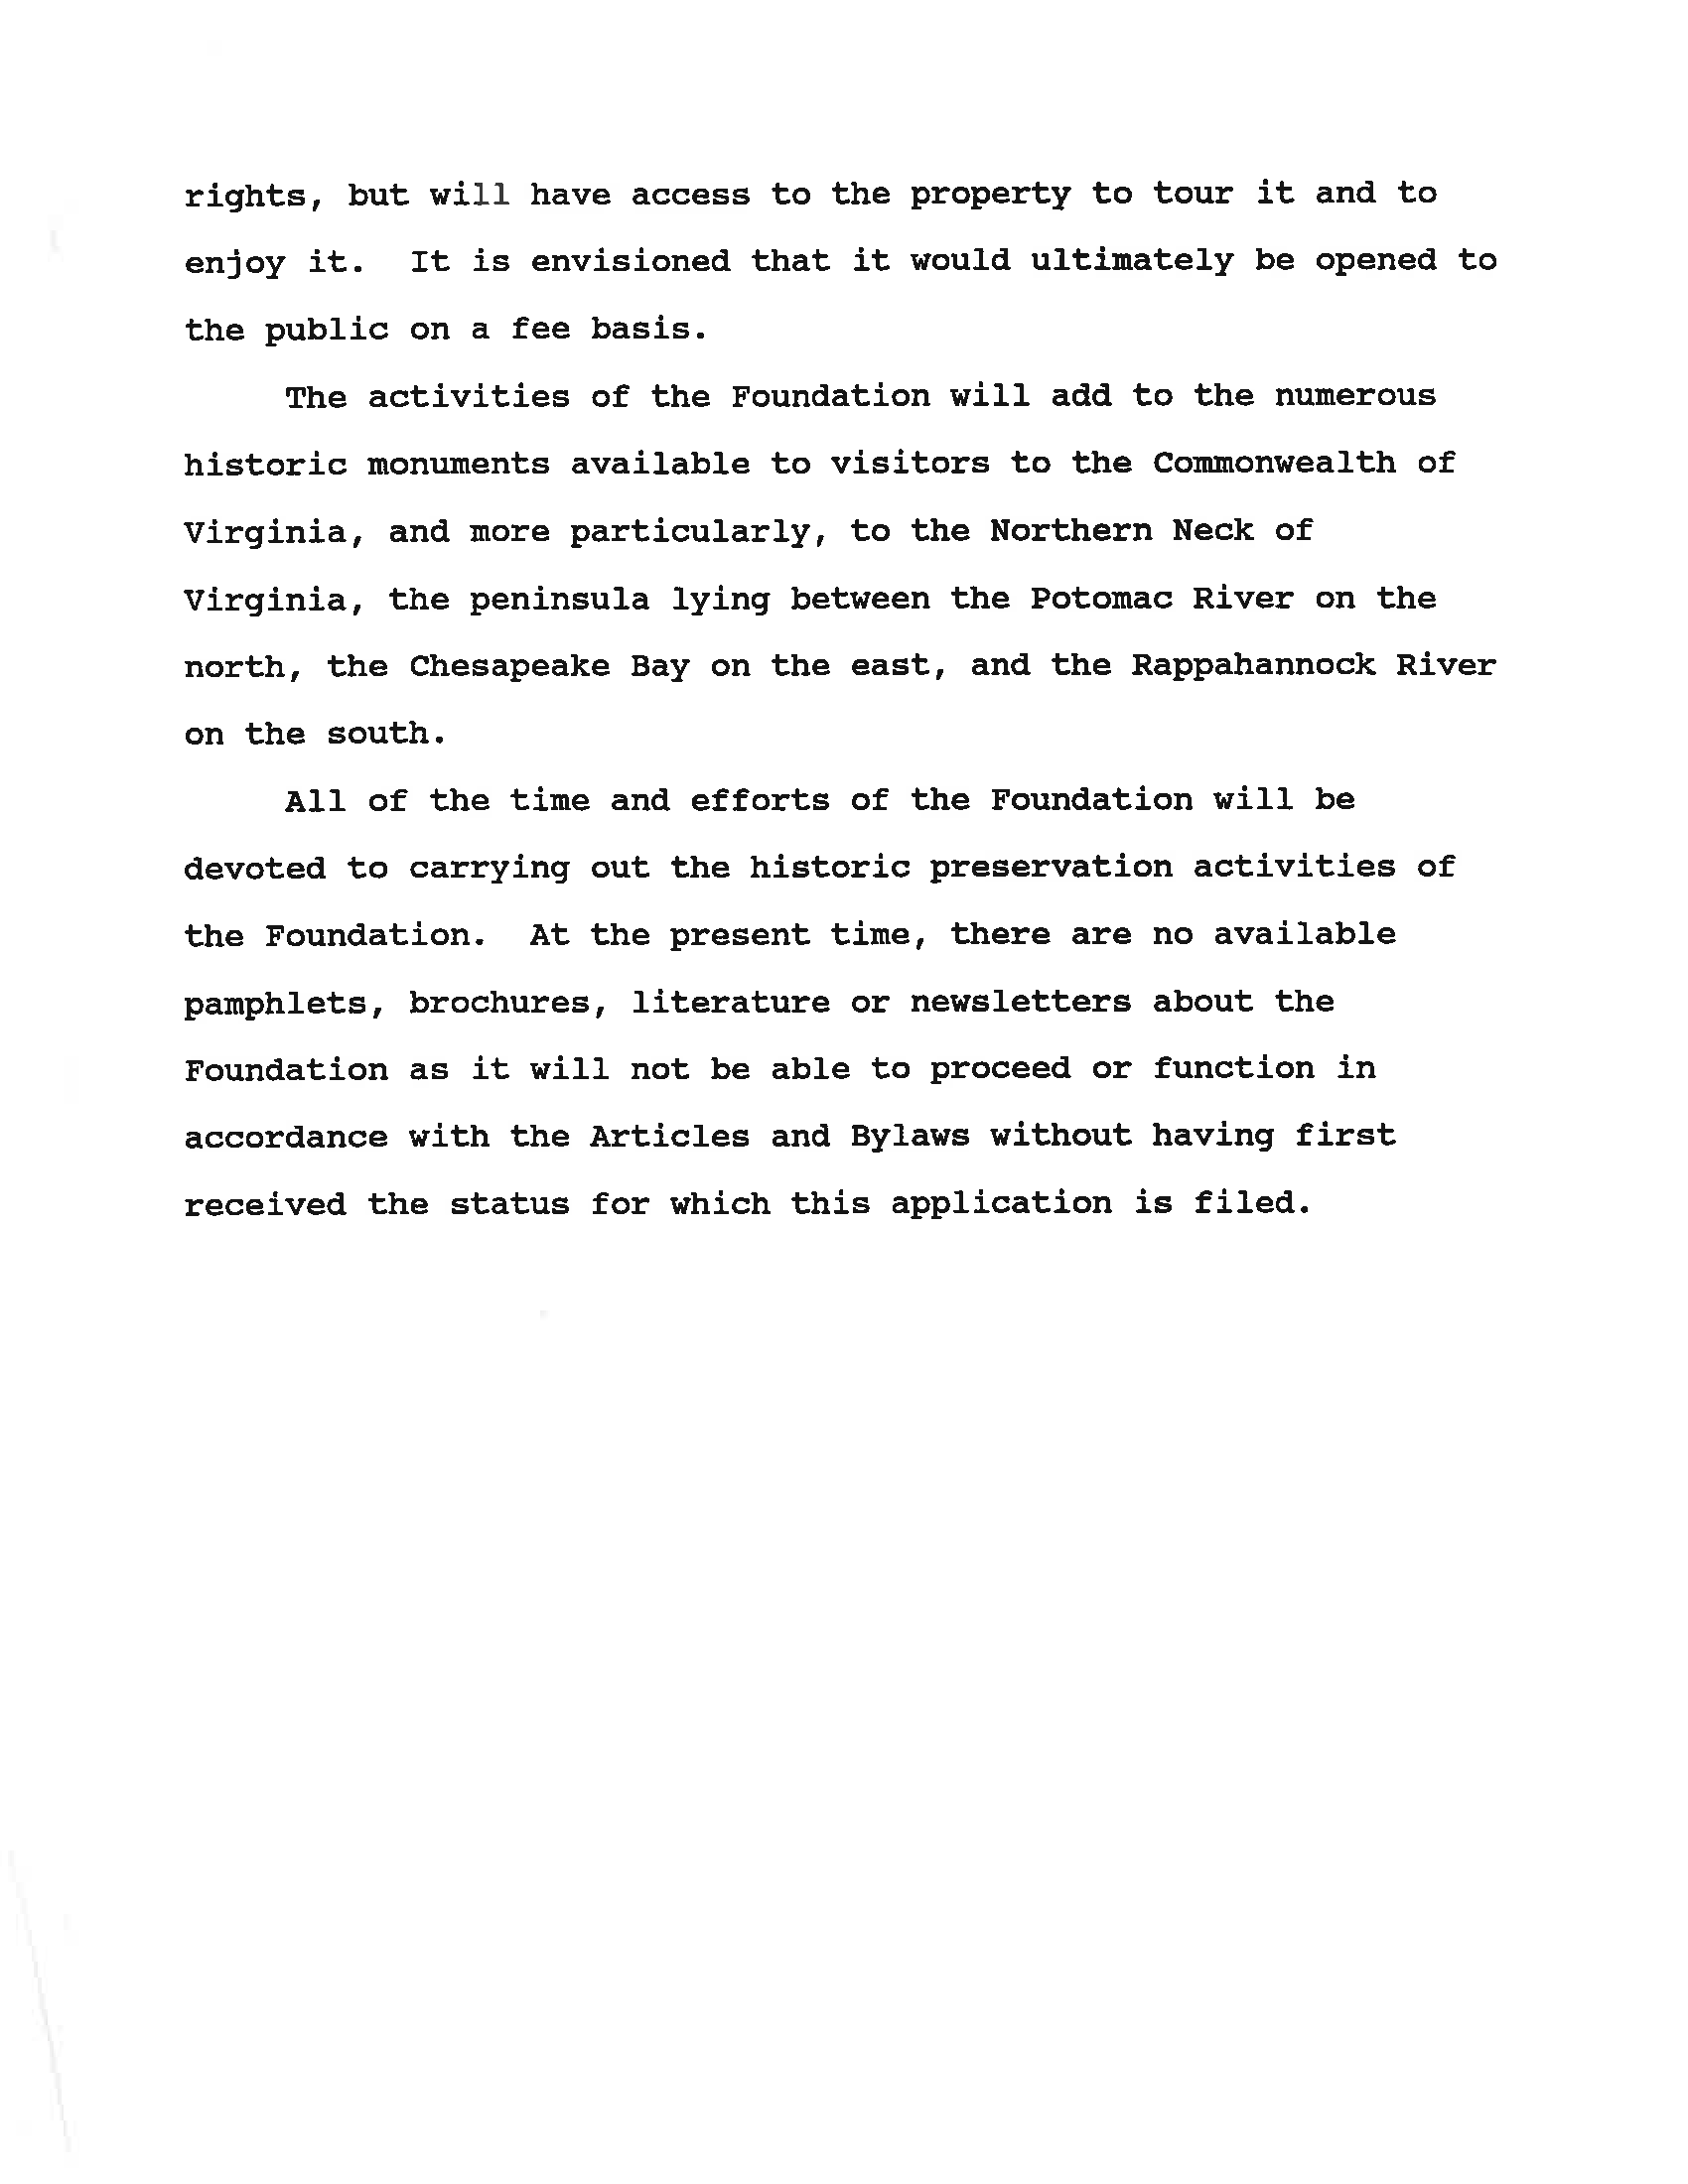 Menokin Foundation Articles of Incorporation_Page_14.png